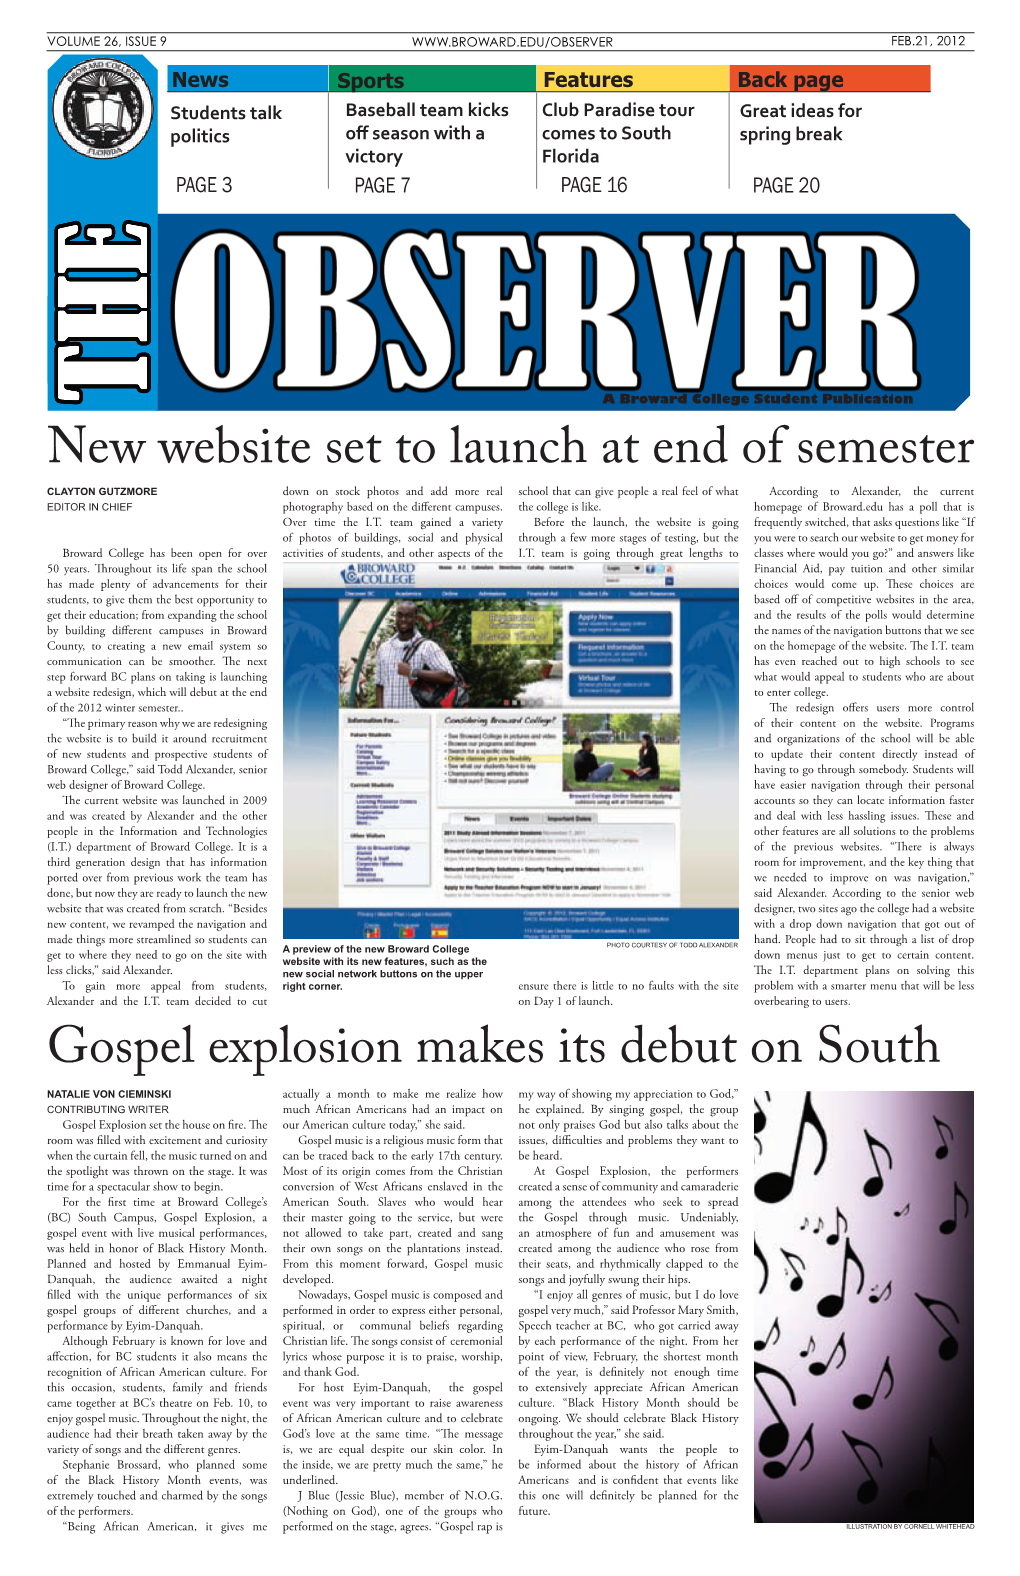 New Website Set to Launch at End of Semester Gospel Explosion Makes Its Debut on South